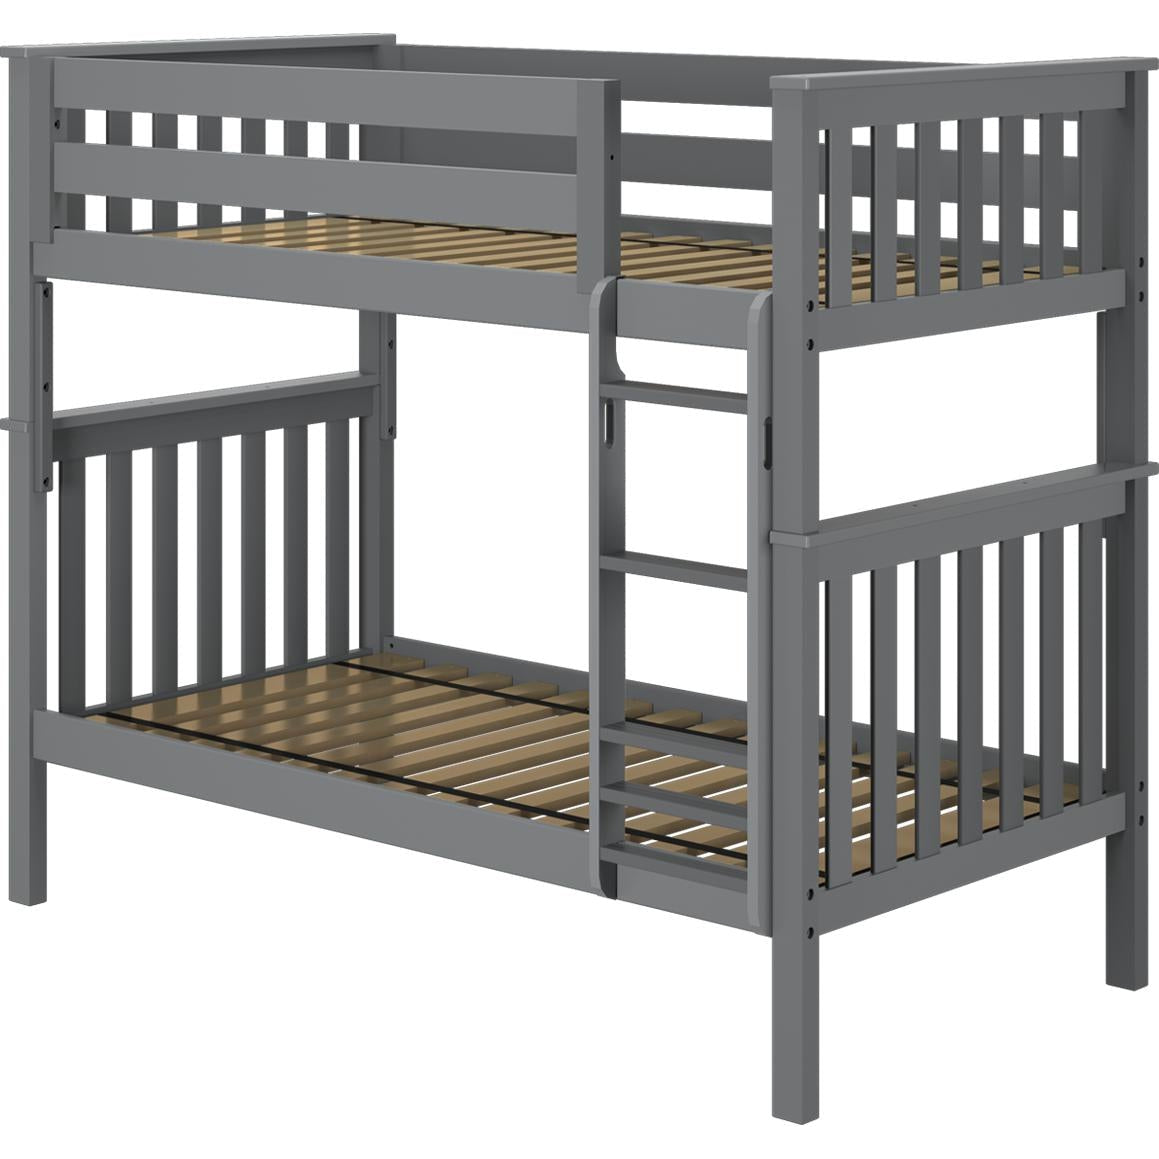 Jackpot Deluxe Bristol Twin over Twin Bunk Bed